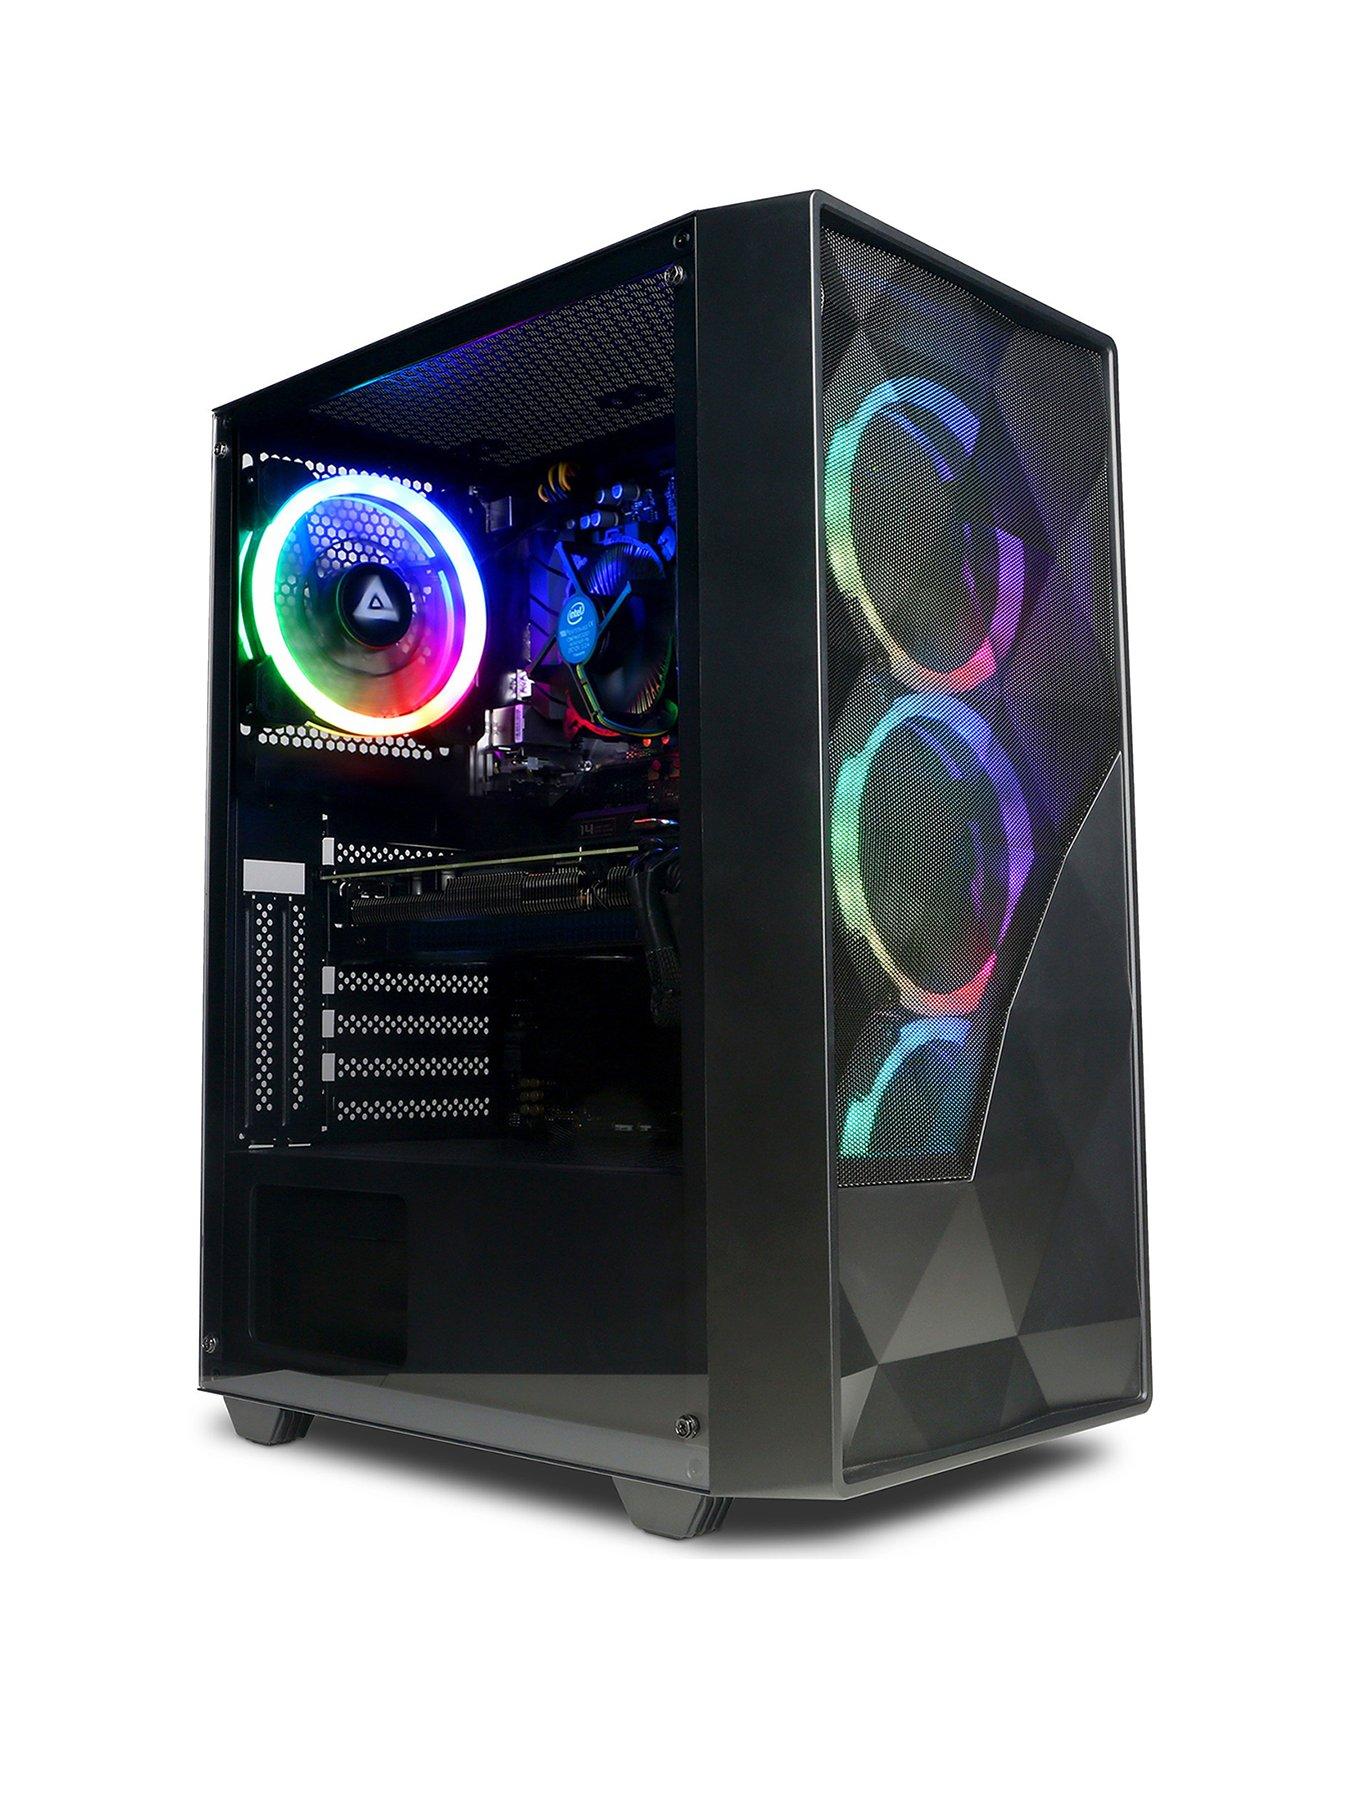 Horizon 500 R5 16GB 500GB Integrated Gaming PC, 24 Inch Monitor, Keyboard  and Mouse Bundle